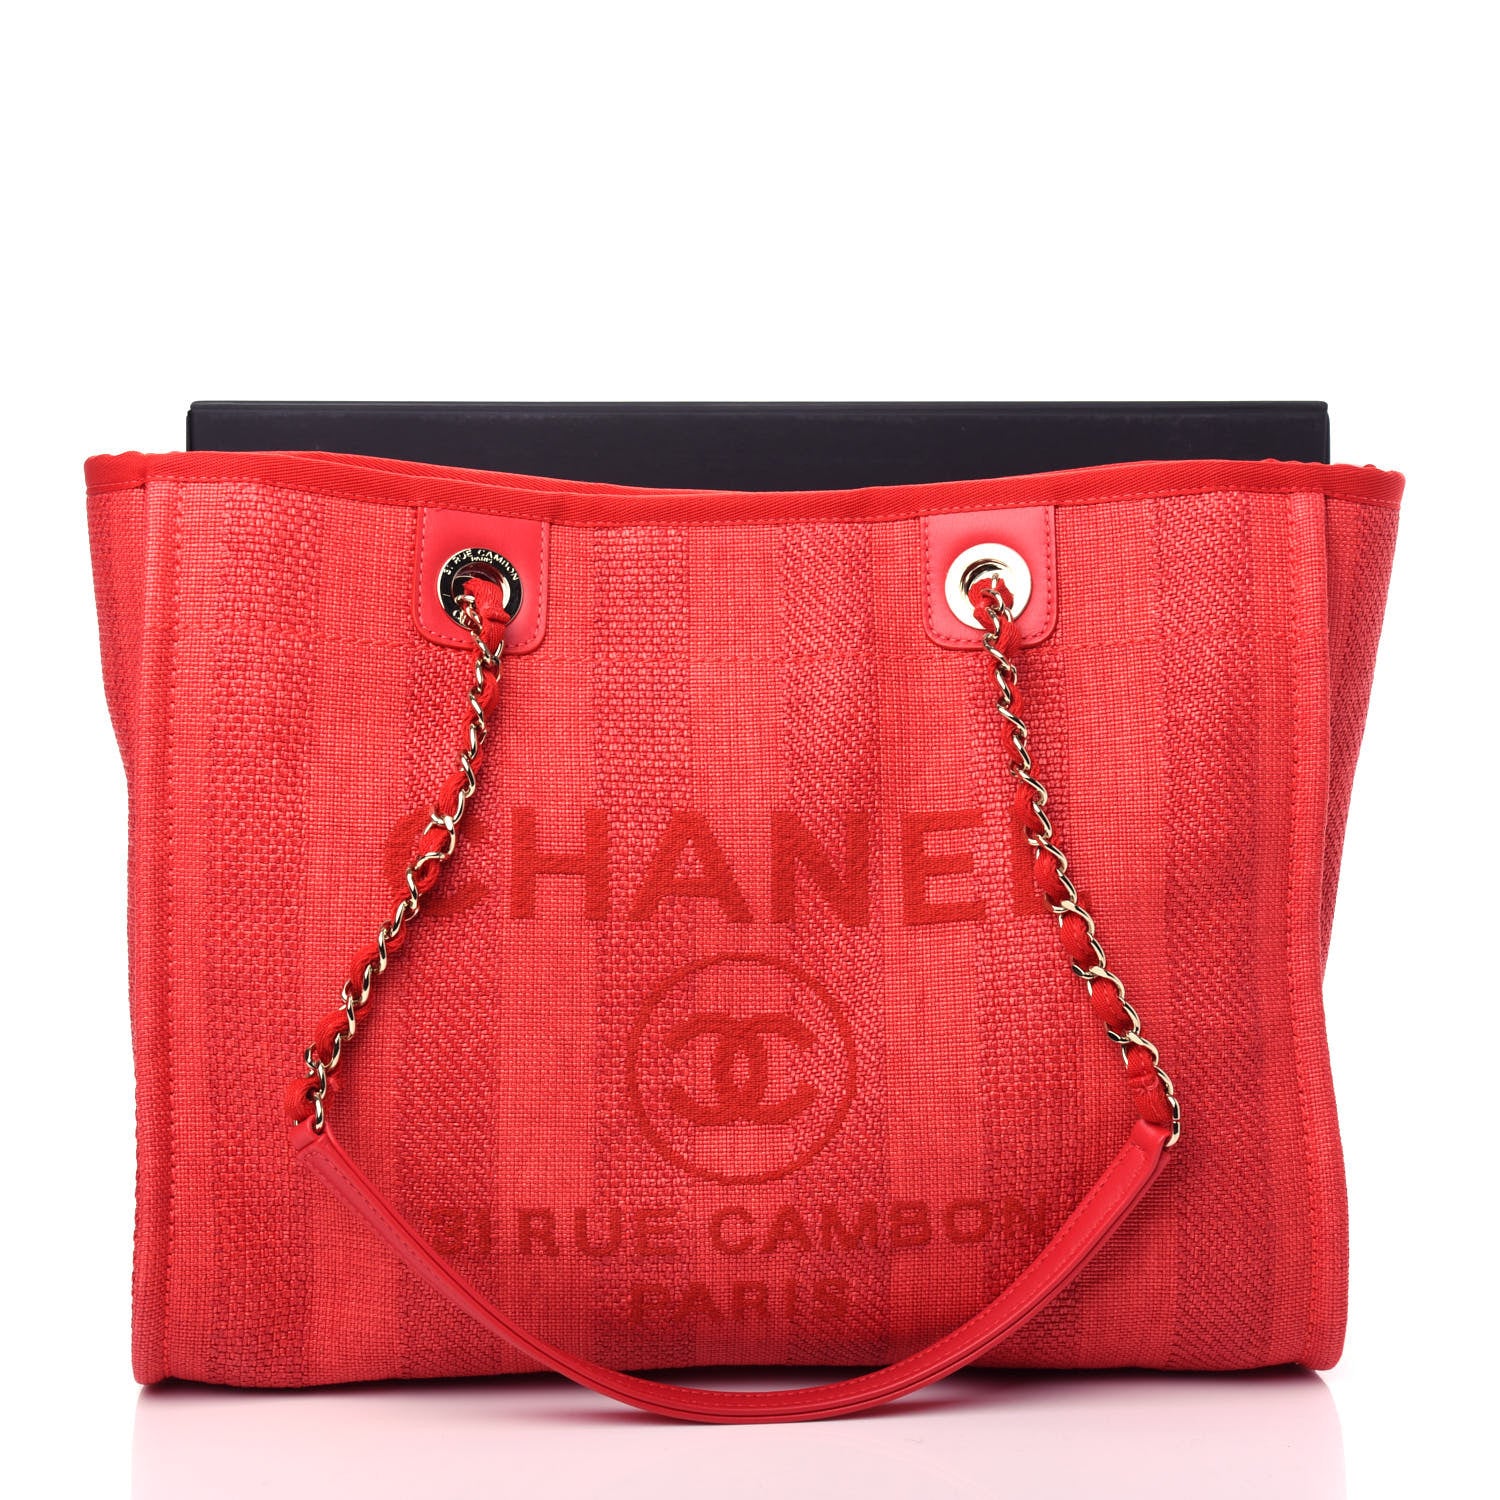 Chanel Red Denim Canvas Large Deauville Tote